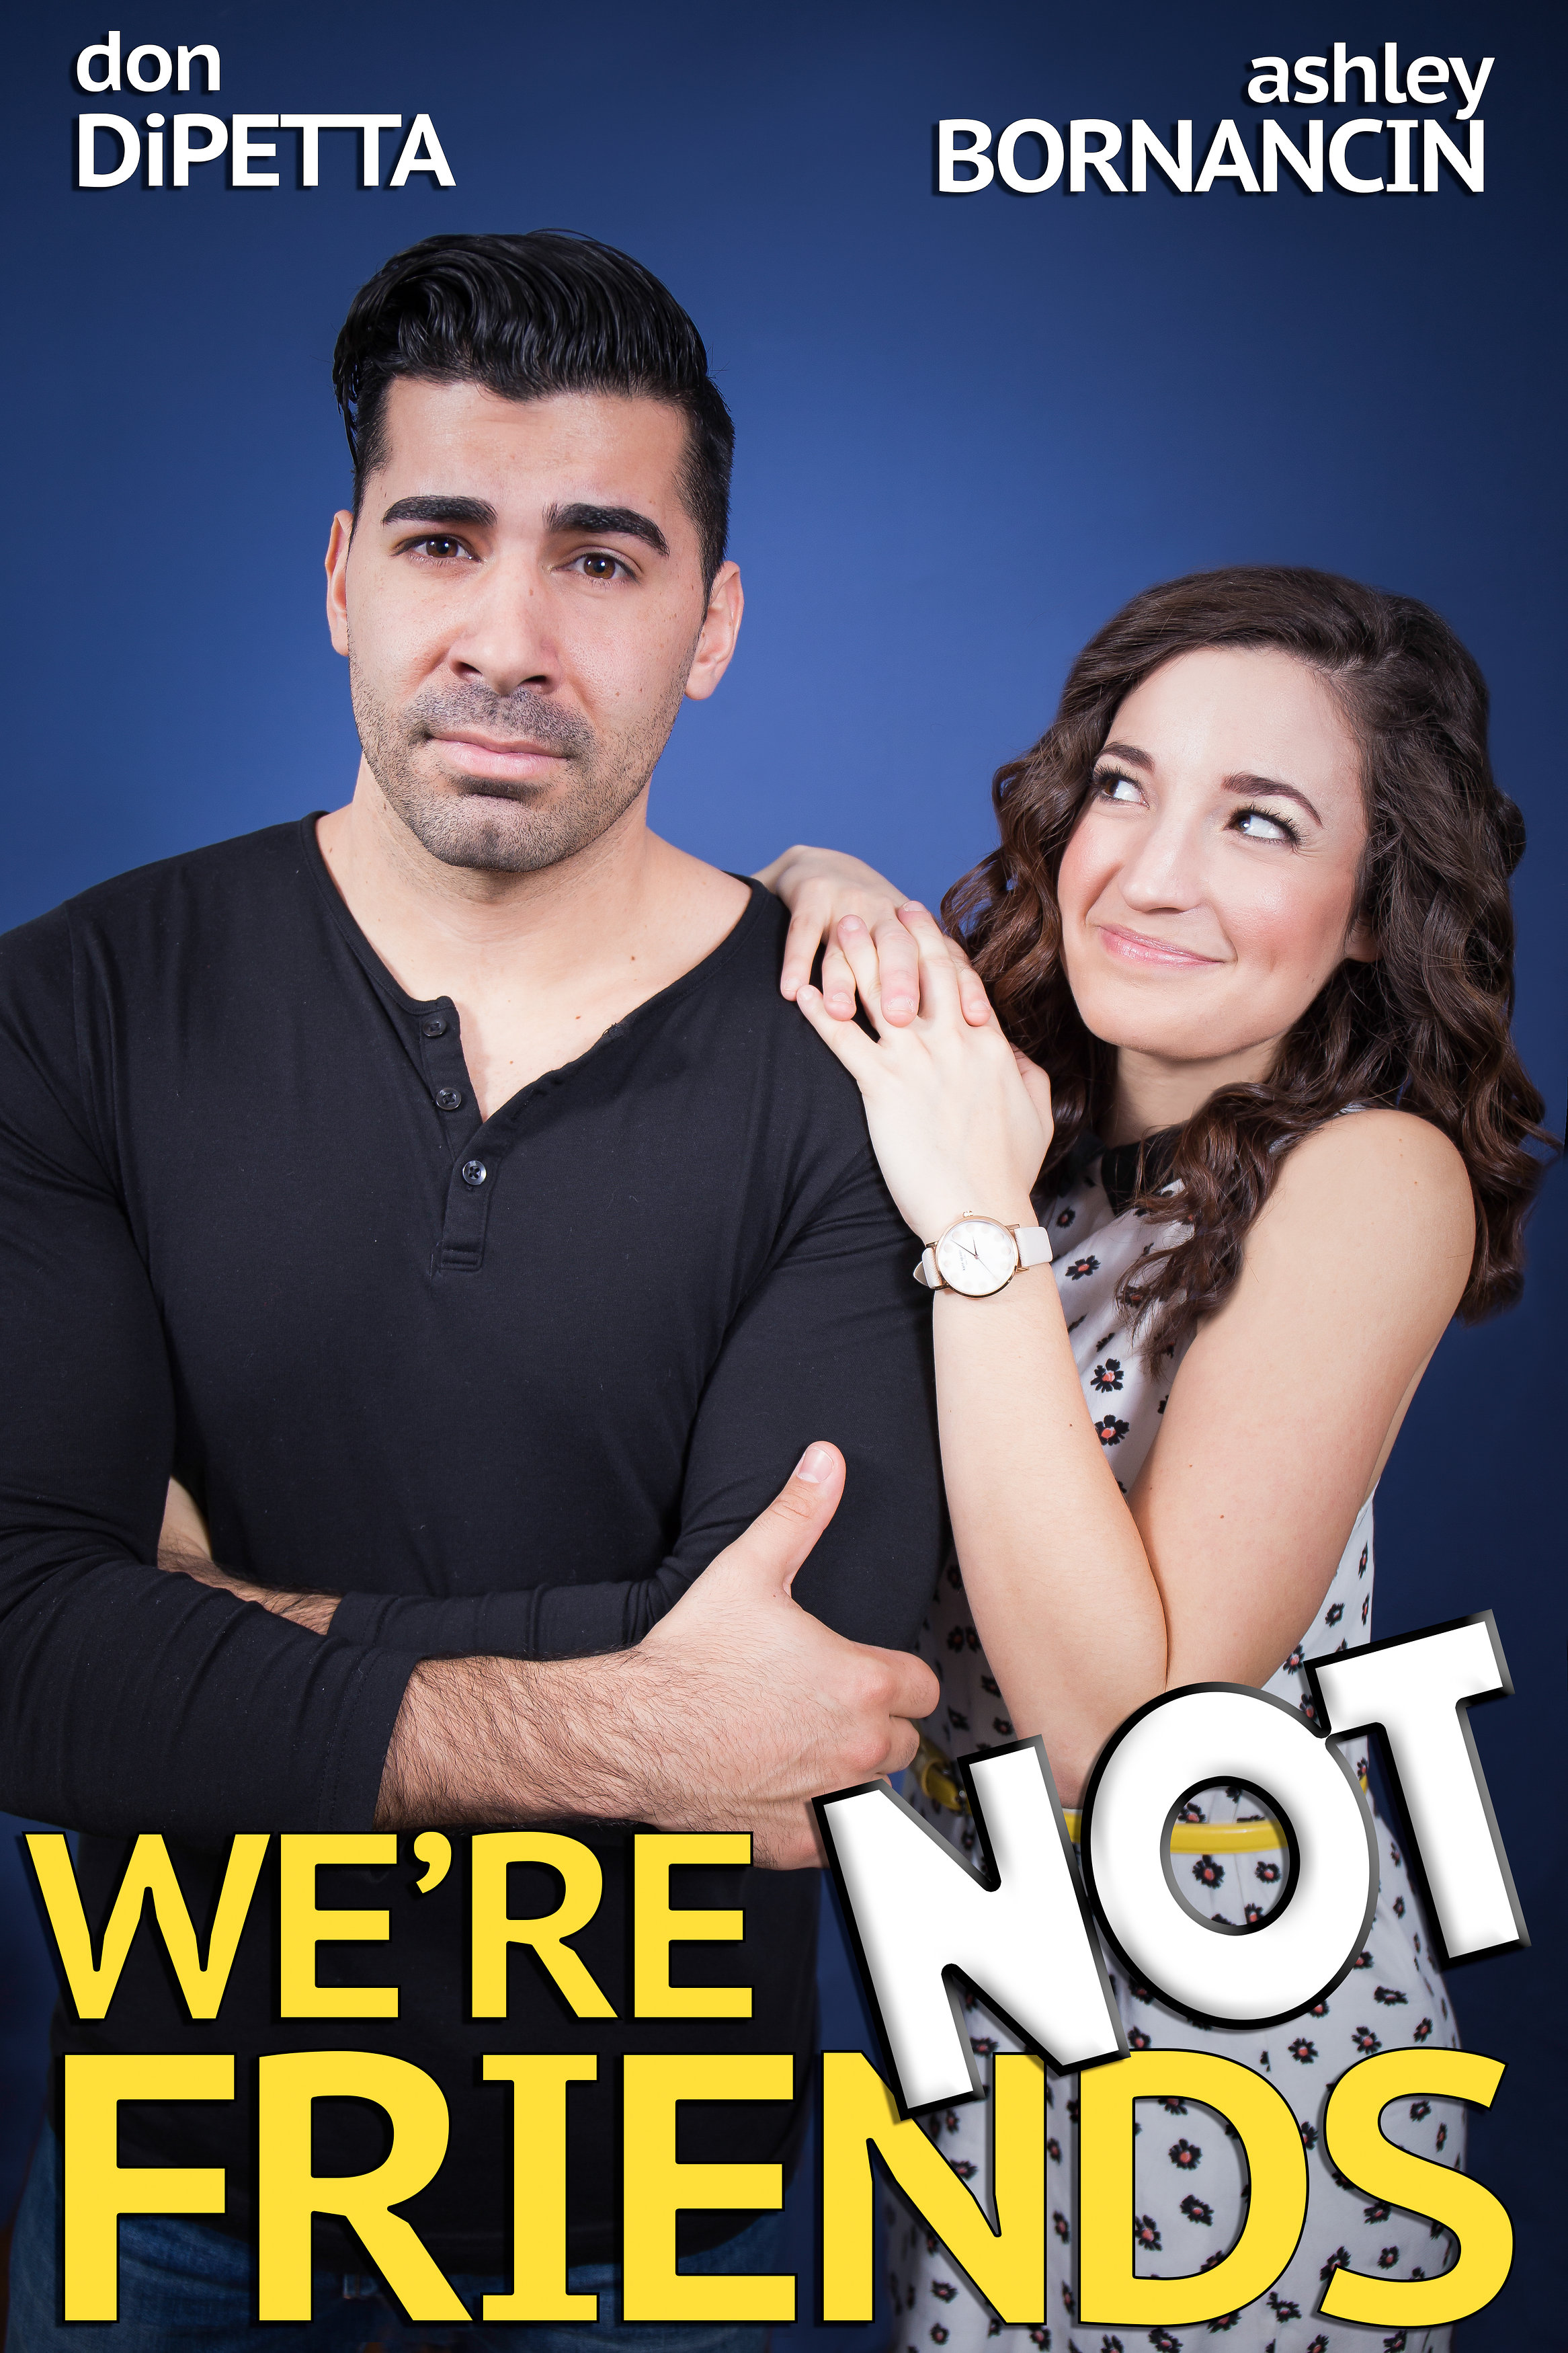 We're Not Friends TV Series - created by Ashley Bornancin and Don DiPetta